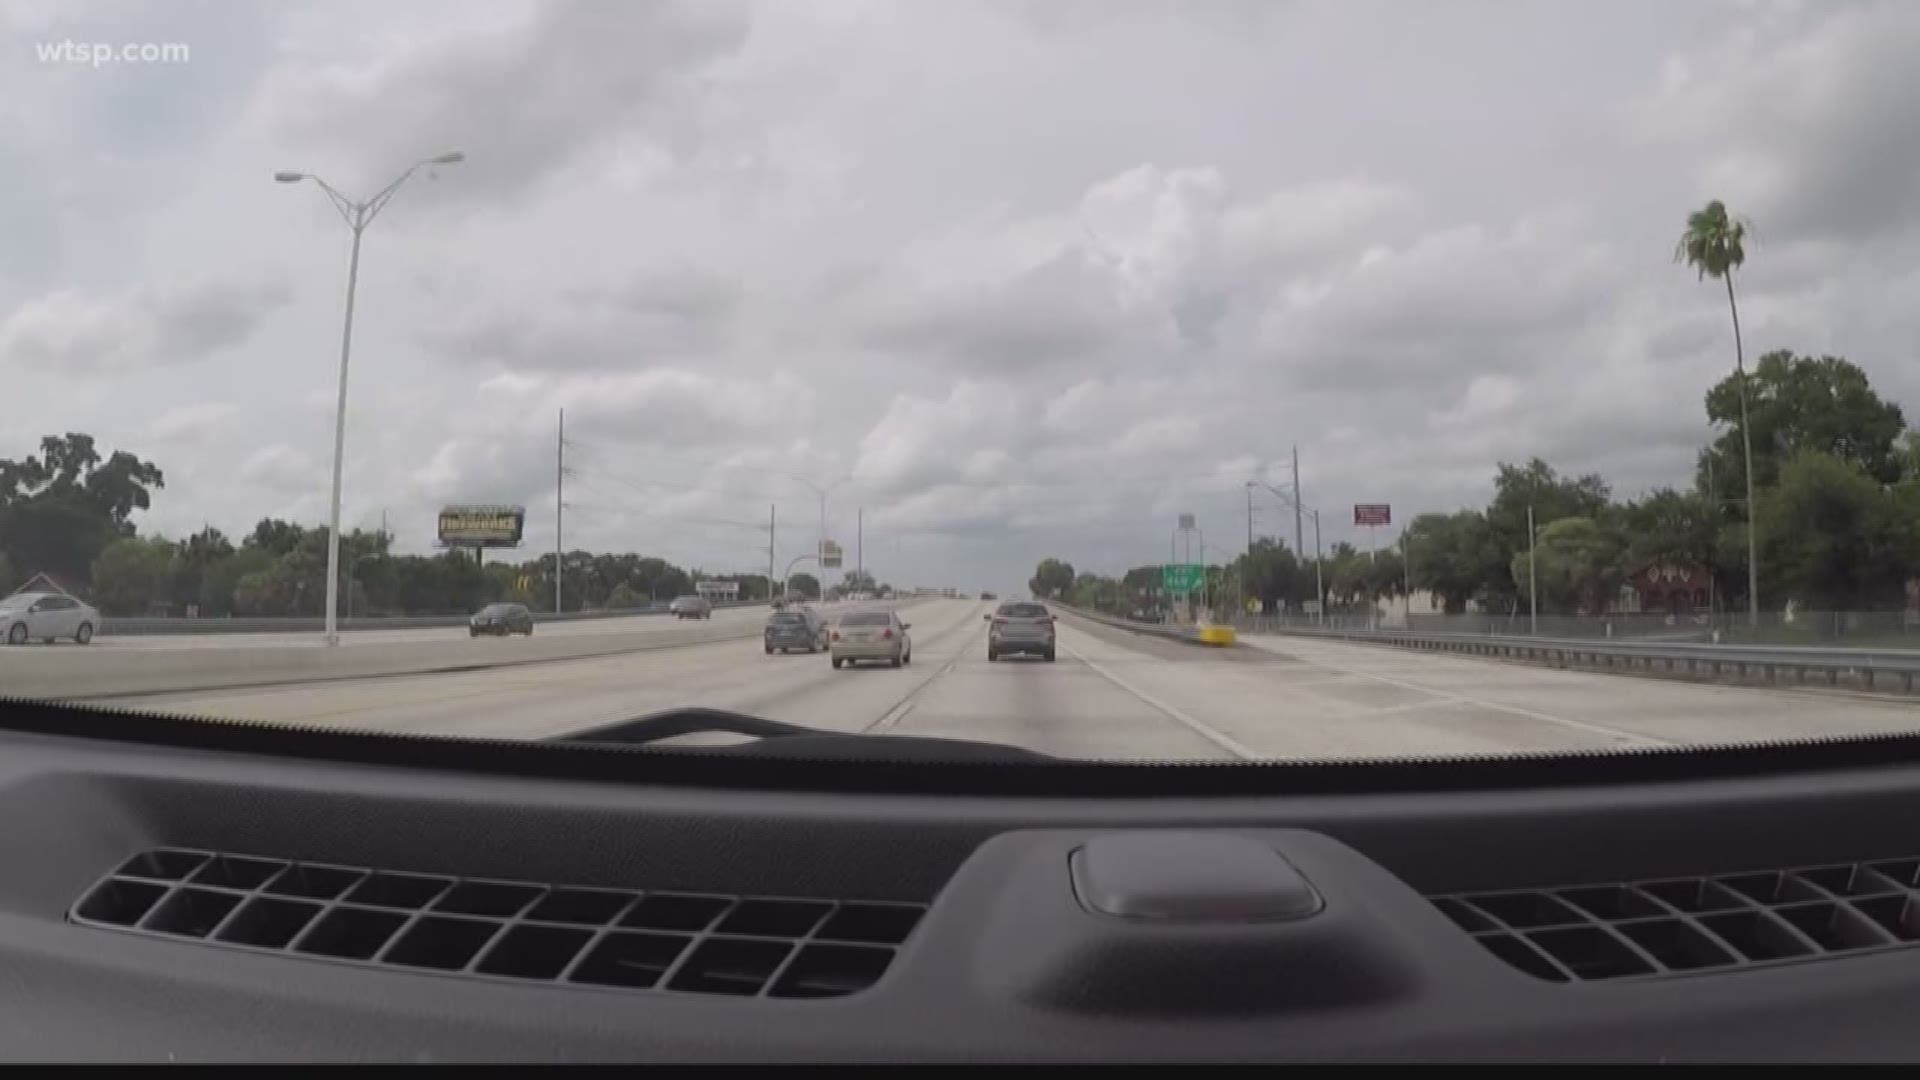 The Tampa Bay Partnership says a survey shows 85 percent support widening I-275 near MLK, but the poll's methods are being questioned by those opposed to the plans.